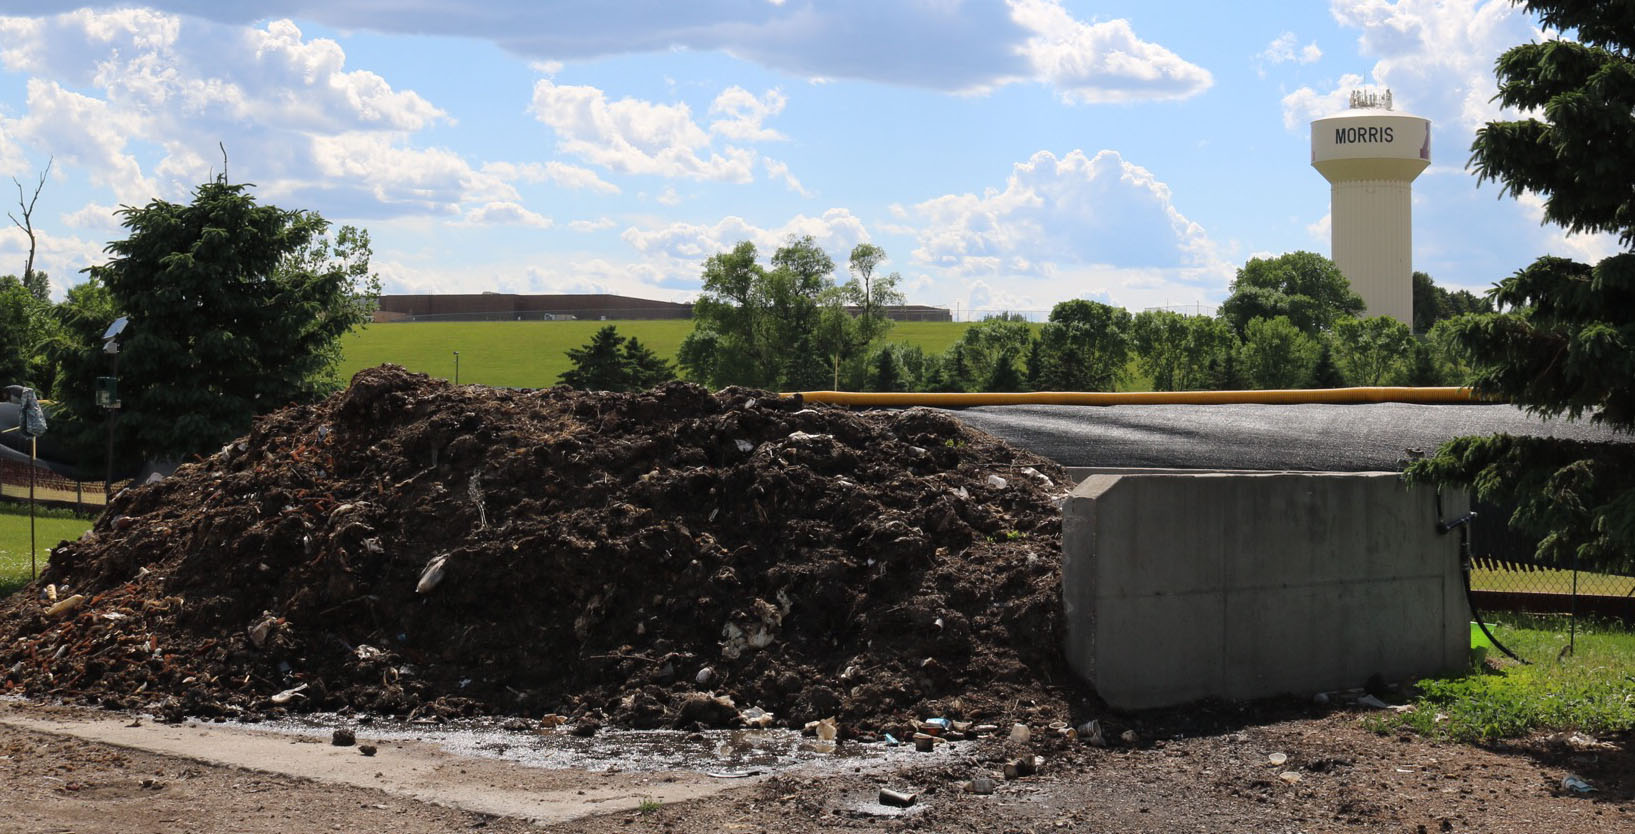 UMN Morris has collected over 600,000 lbs of organics in its first 7 years of composting.